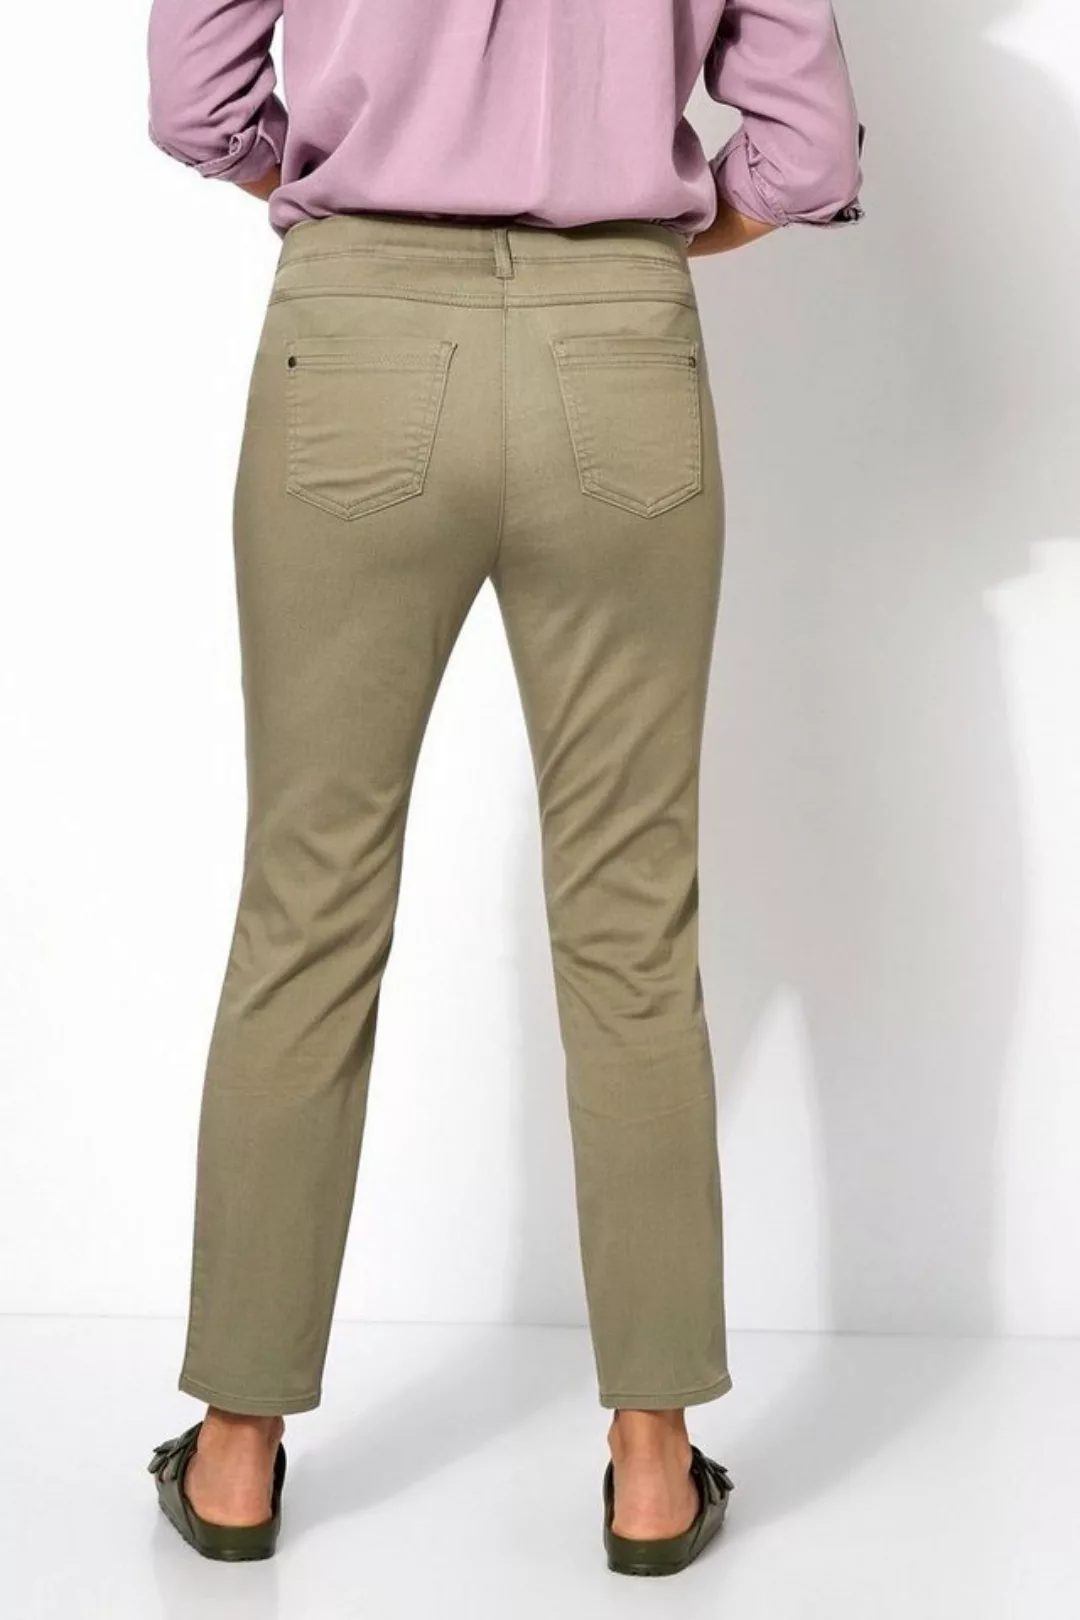 Relaxed by TONI 5-Pocket-Hose Toni Relaxed günstig online kaufen